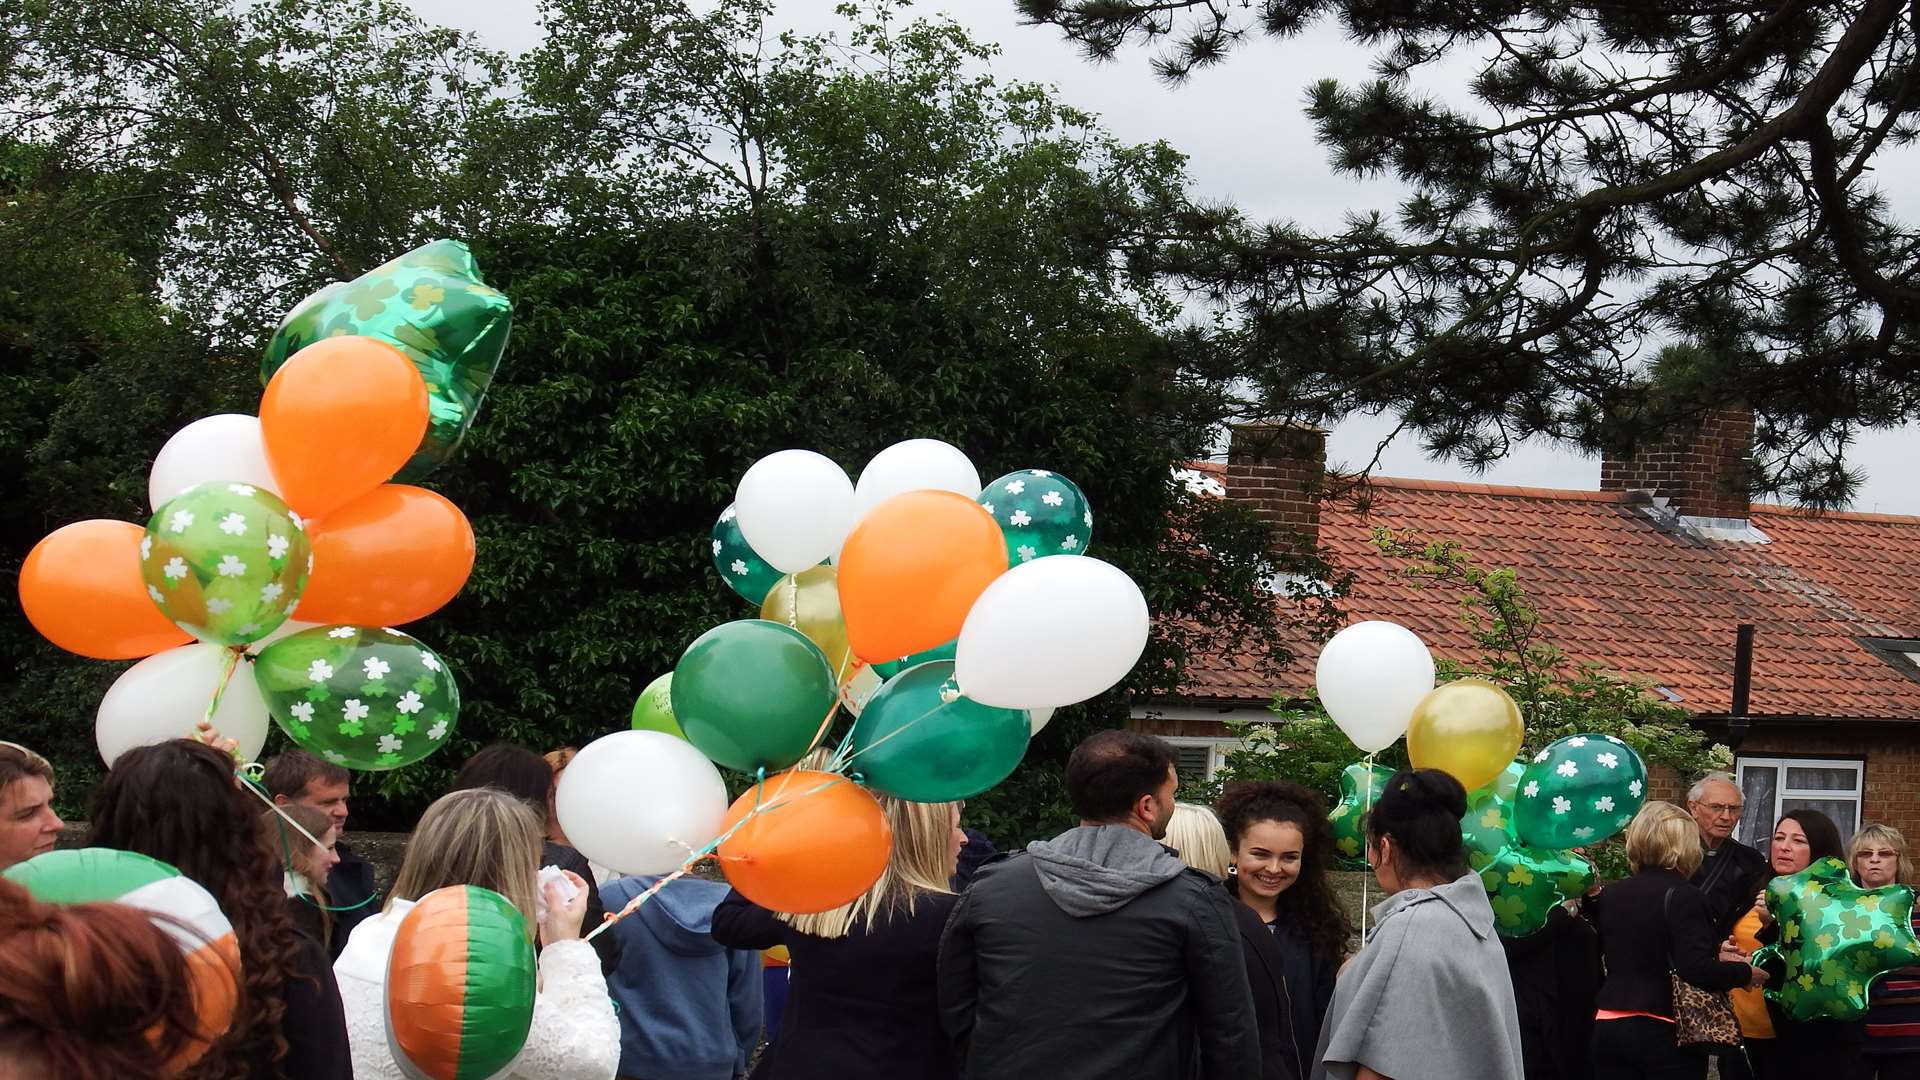 Balloons in the colours of the Irish flag were released in memory of Michael Tierney